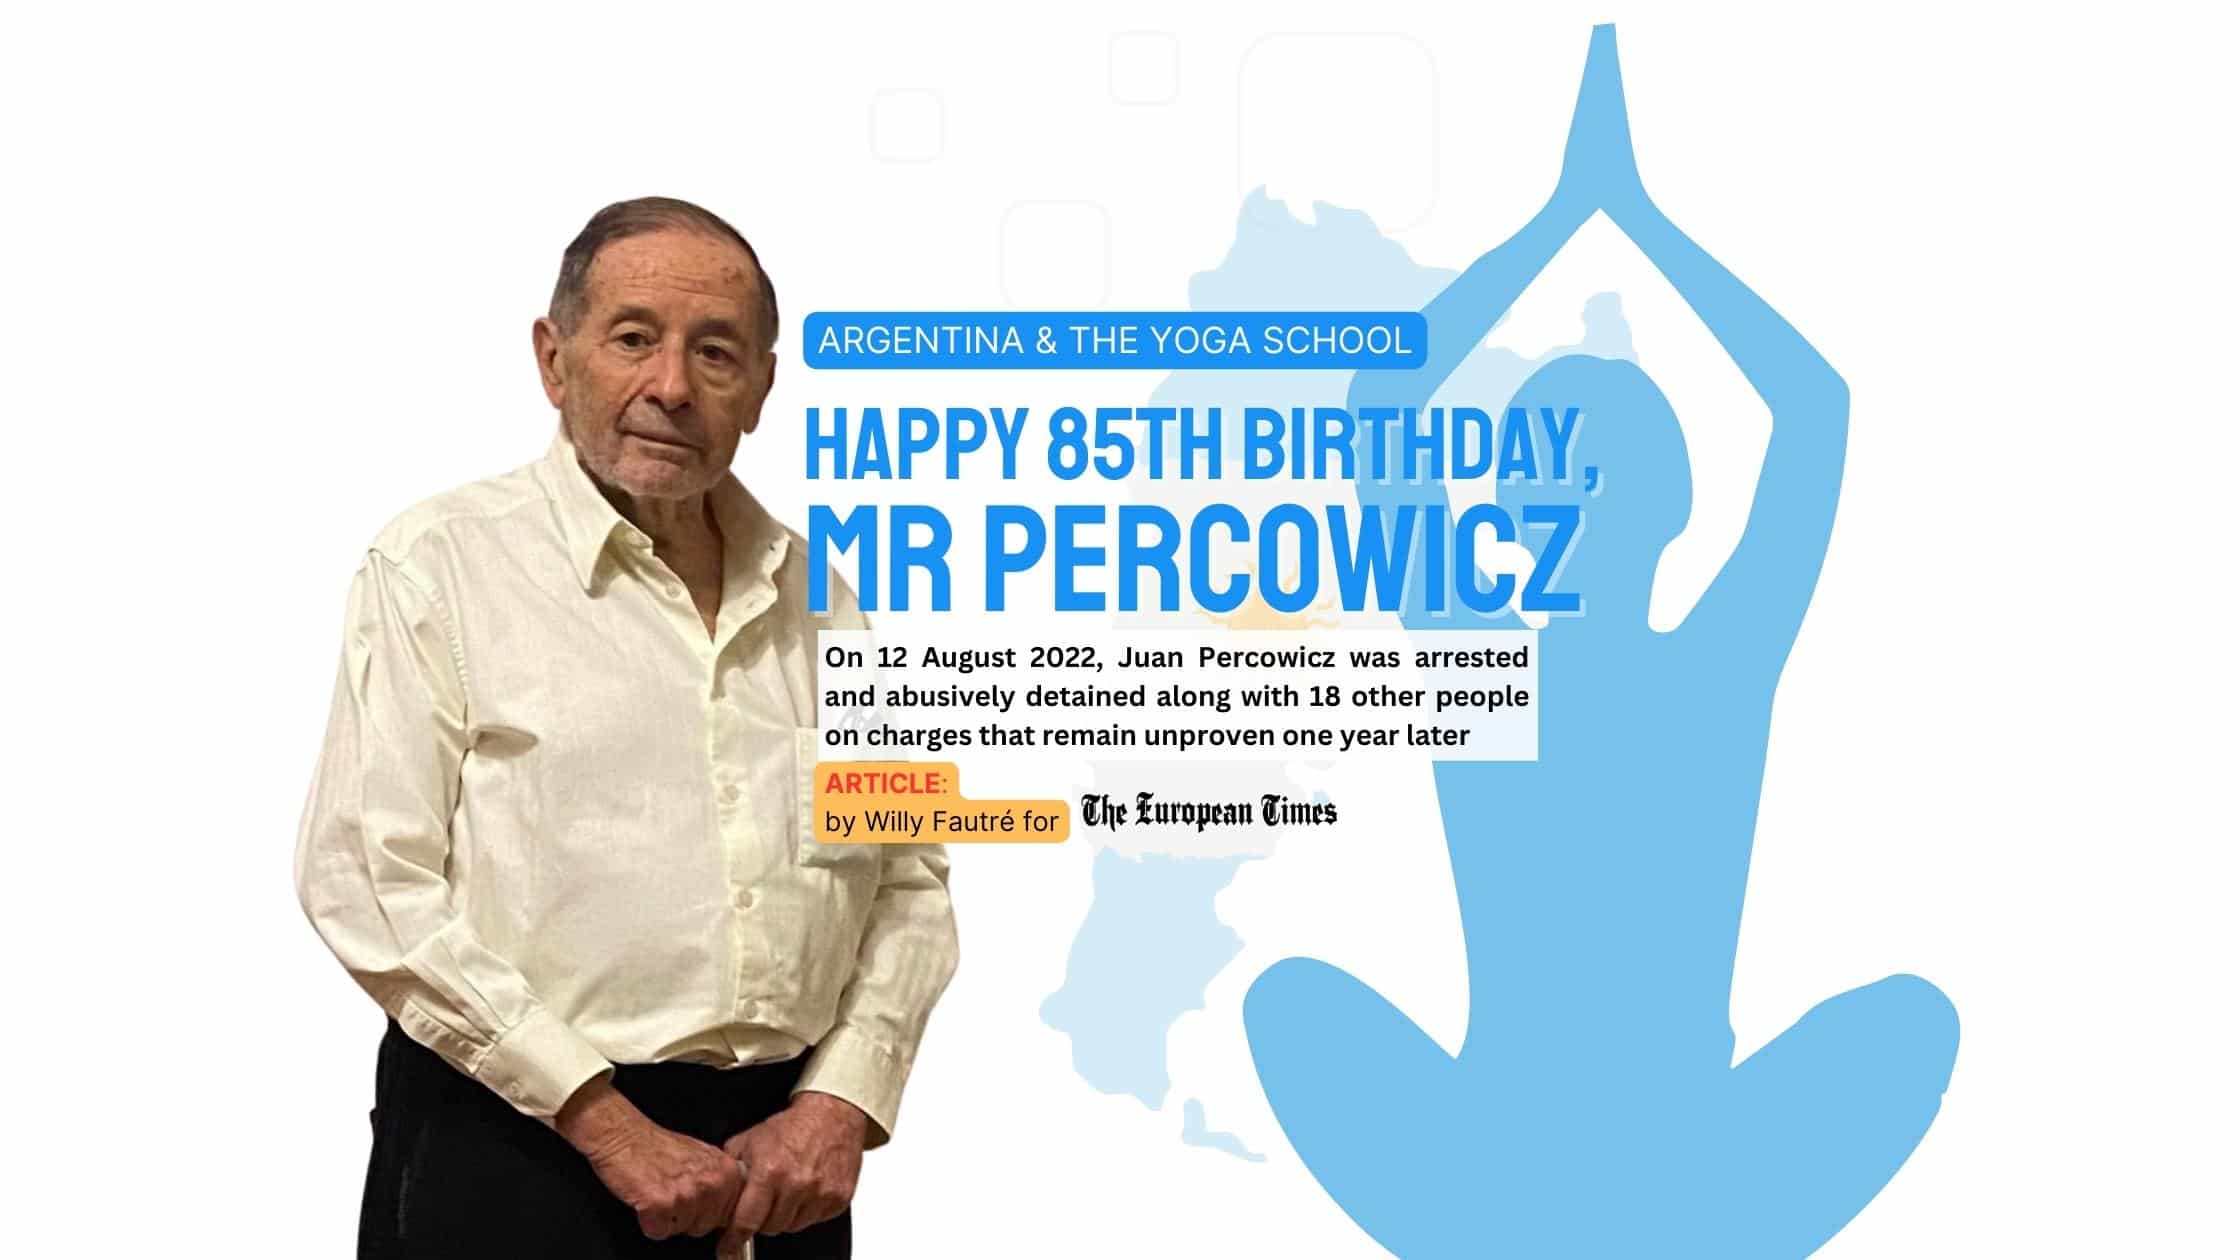 Argentina and its Yoga School: Happy 85th birthday, Mr Percowicz